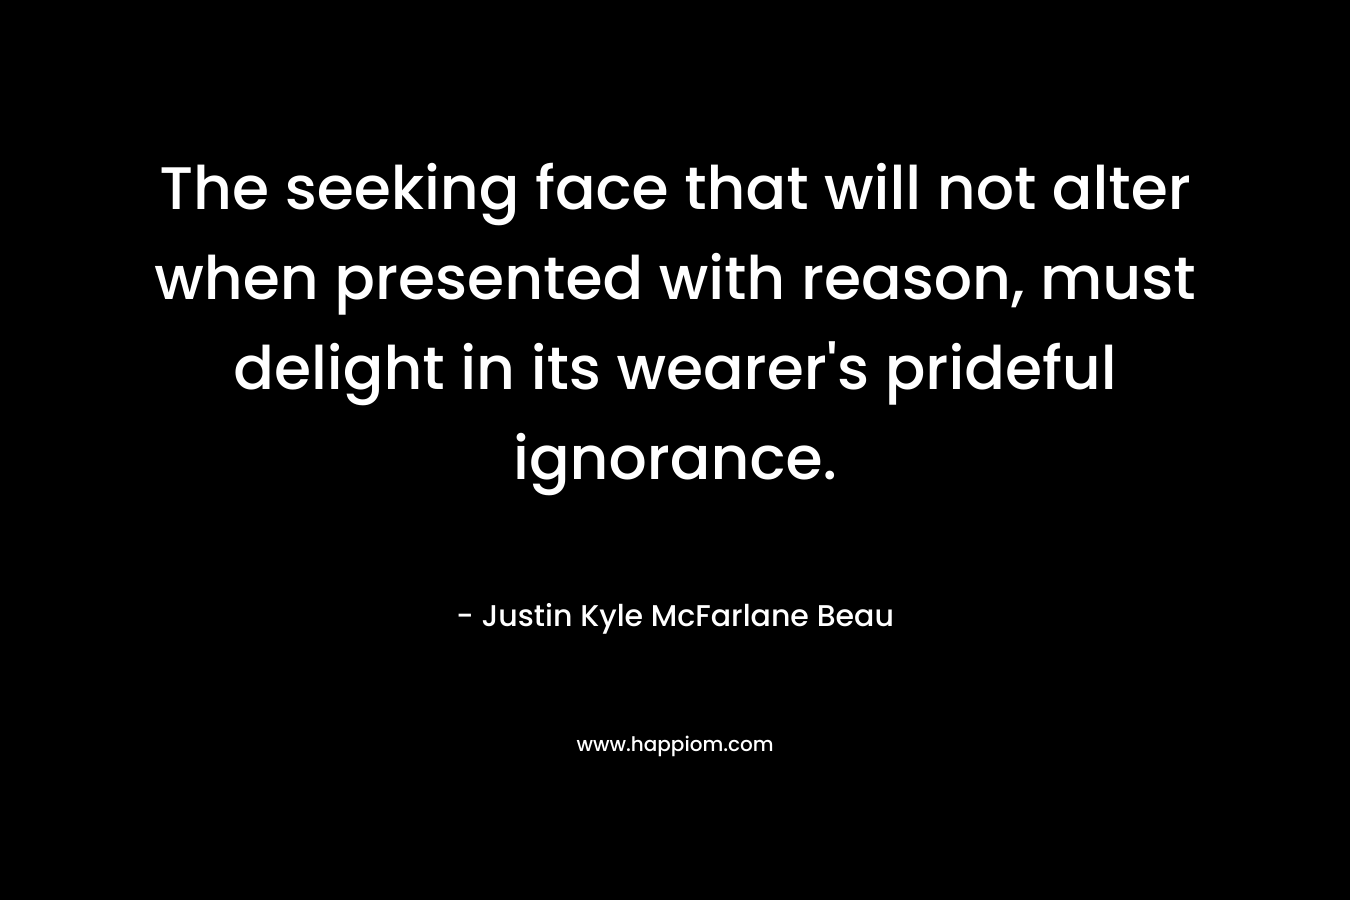 The seeking face that will not alter when presented with reason, must delight in its wearer's prideful ignorance.